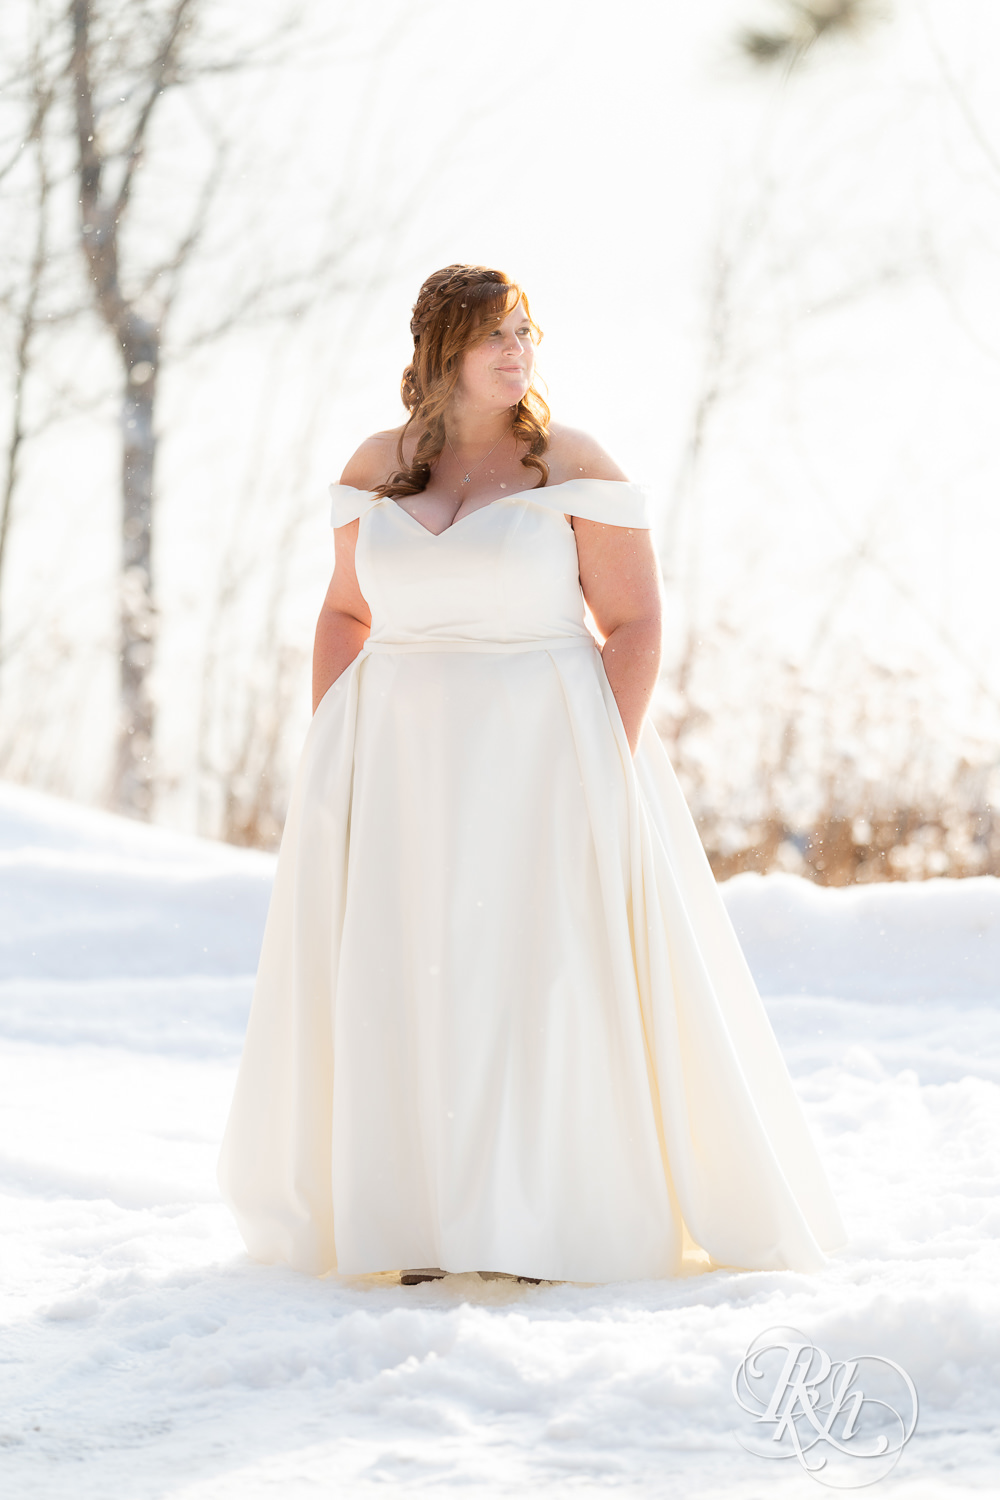 Bride dancing in the snow at Grand Superior Lodge in Two Harbors, Minnesota.